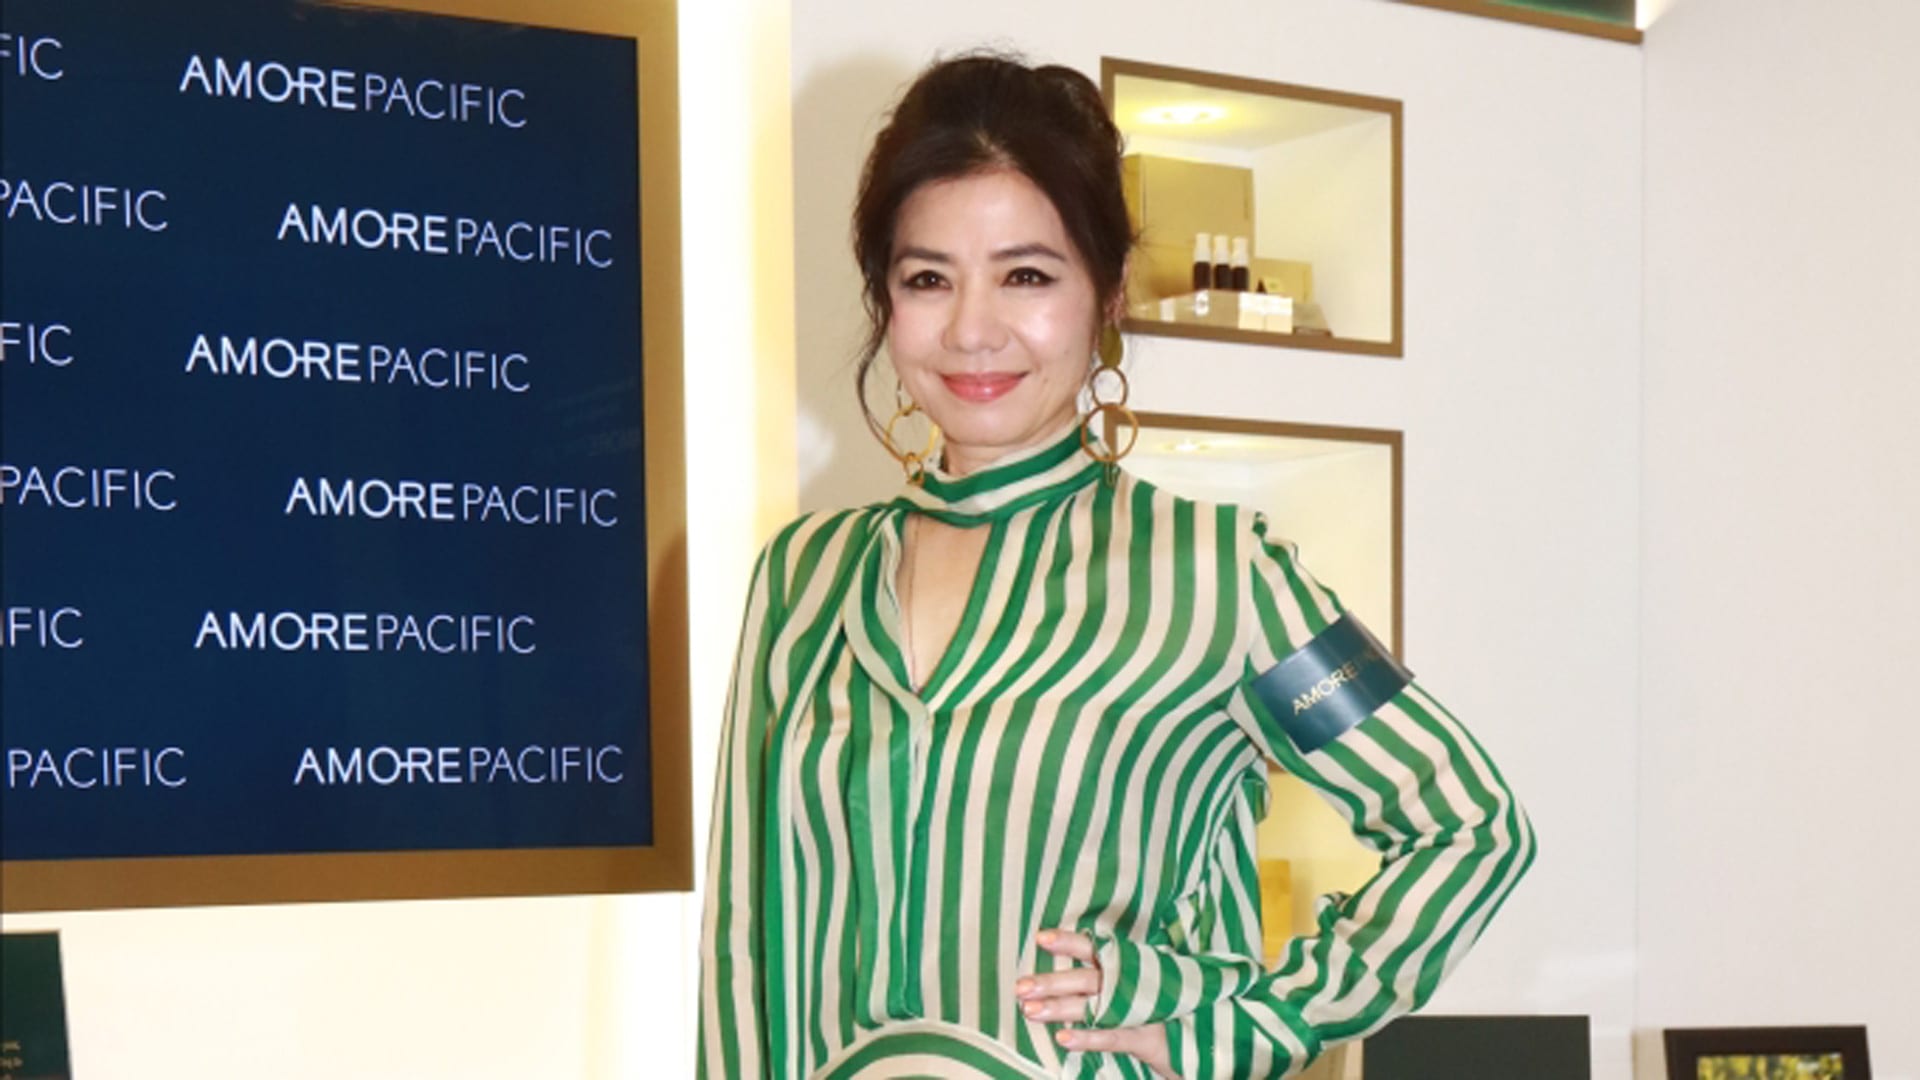 Retired Hongkong Star Cherie Chung Has Reportedly Made S$6.6mil From Property Investments